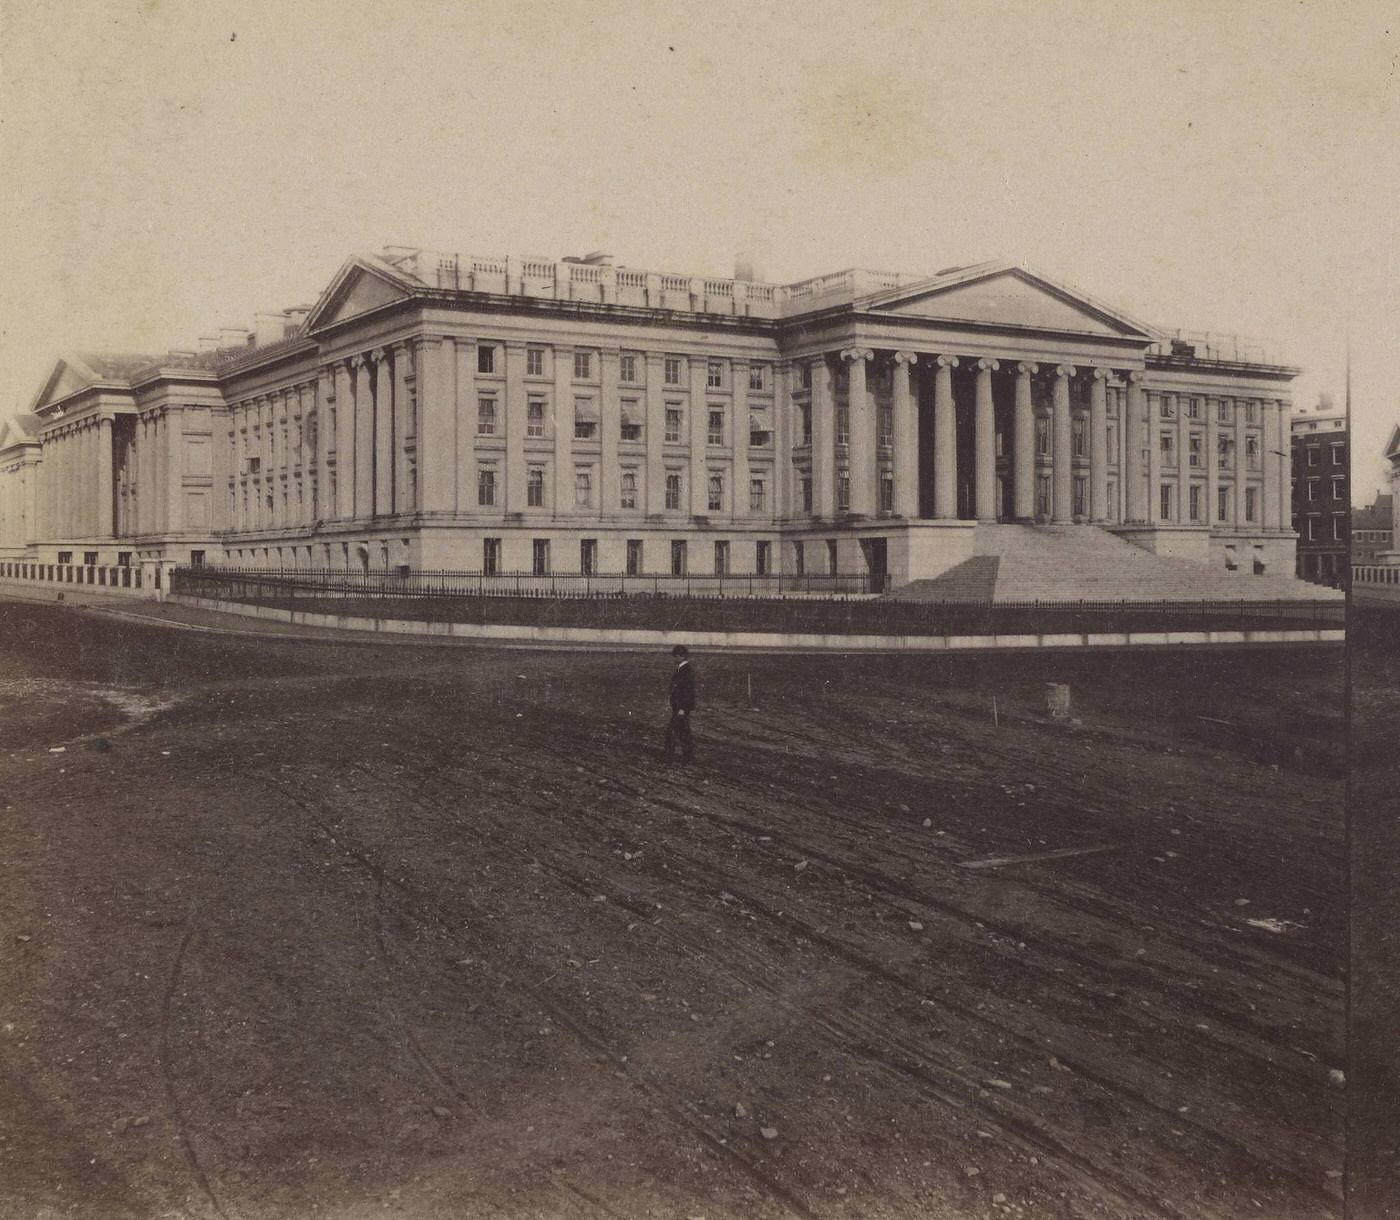 The U.S. Treasury from the South West, Washington, D.C., 1866